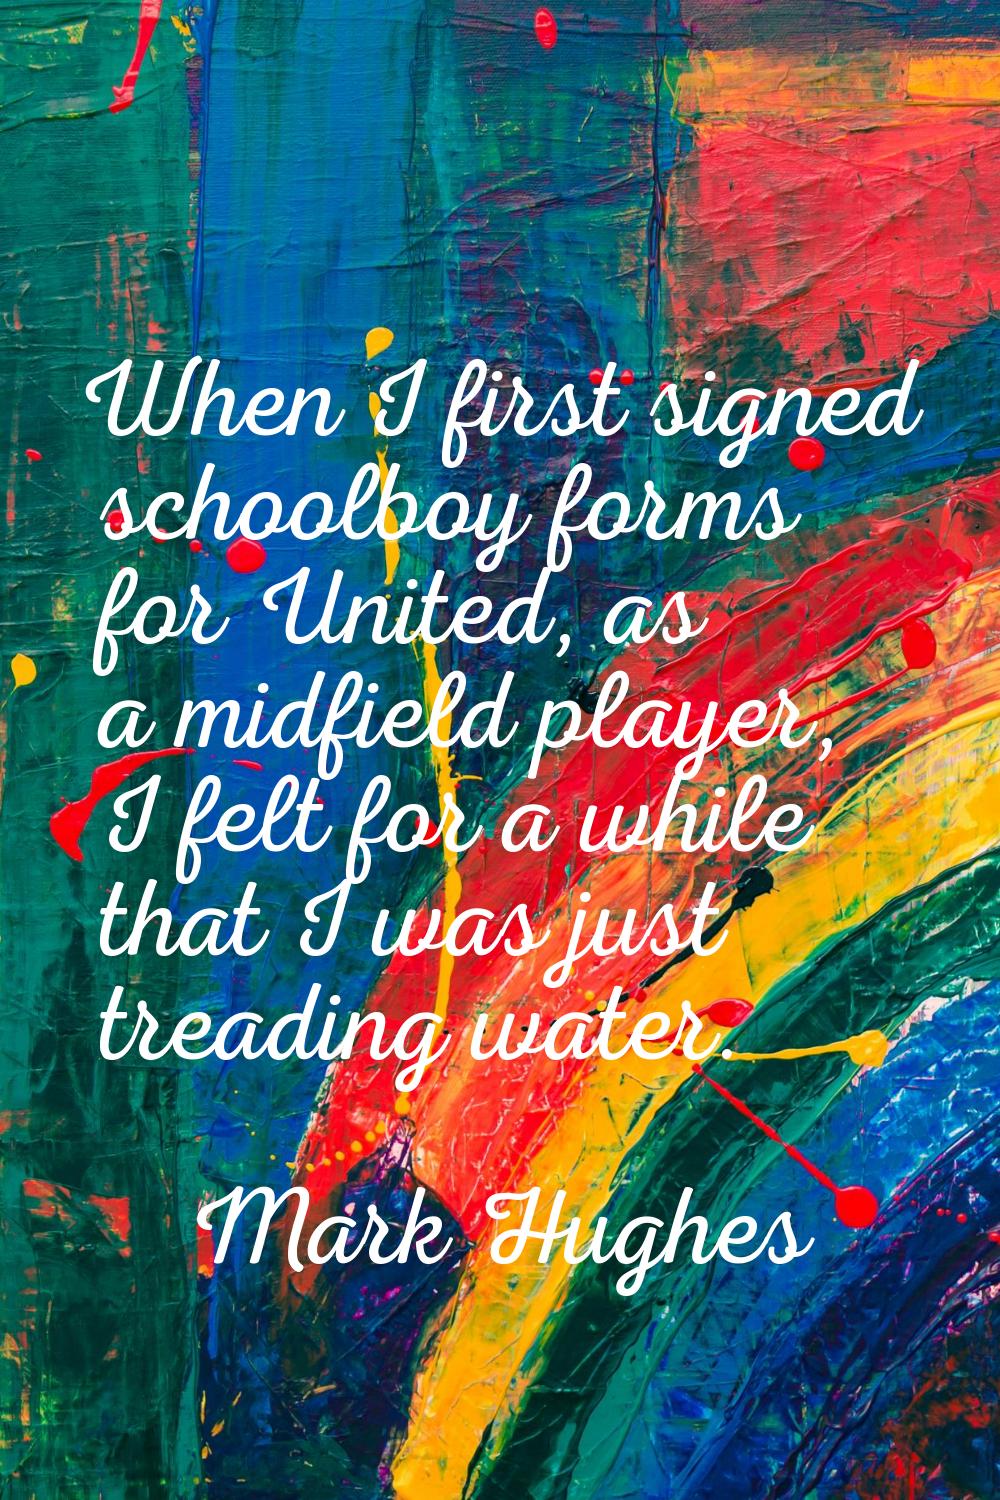 When I first signed schoolboy forms for United, as a midfield player, I felt for a while that I was